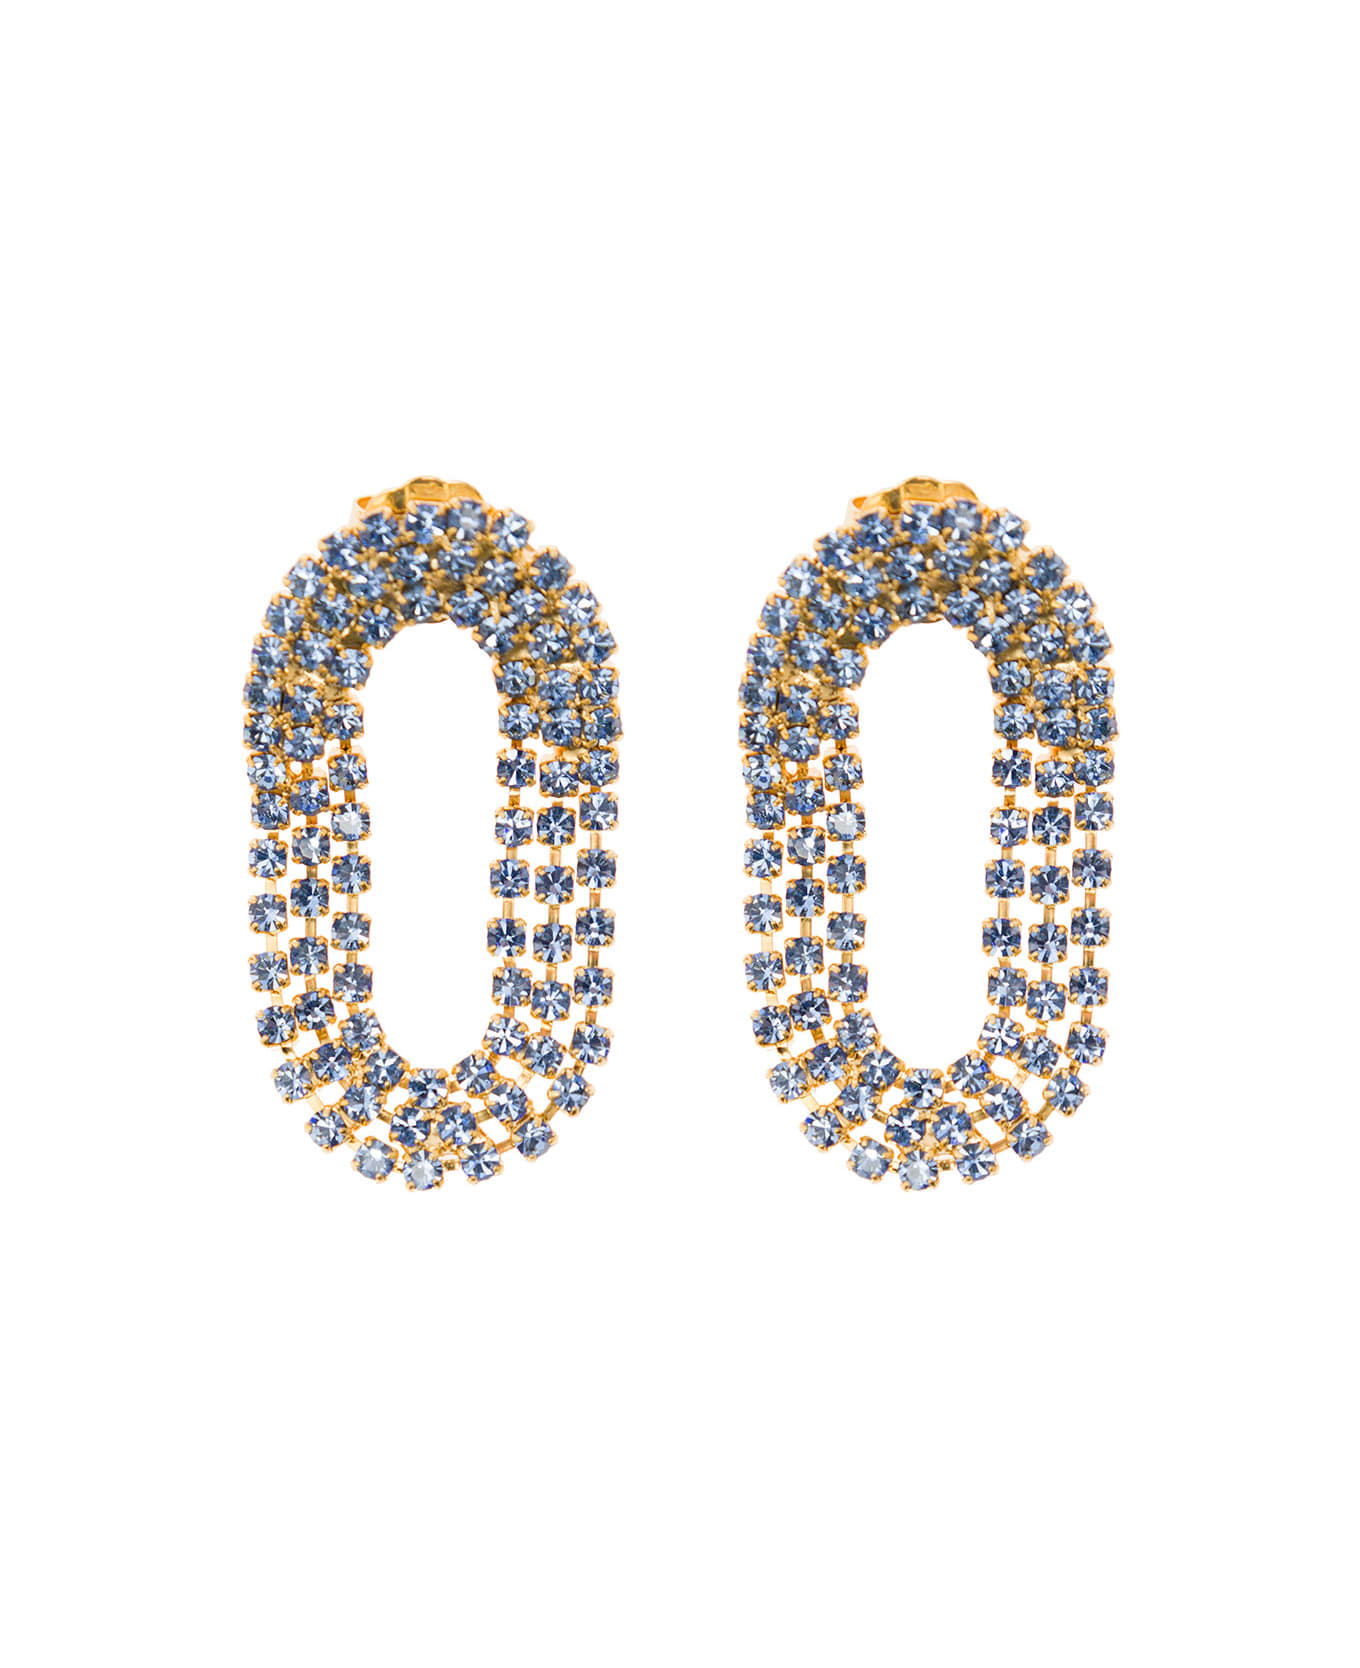 Silvia Gnecchi 'liberty Mini' Earrings With Light Blue Crystals In Galvanized Brass 24k Gold Woman - Metallic